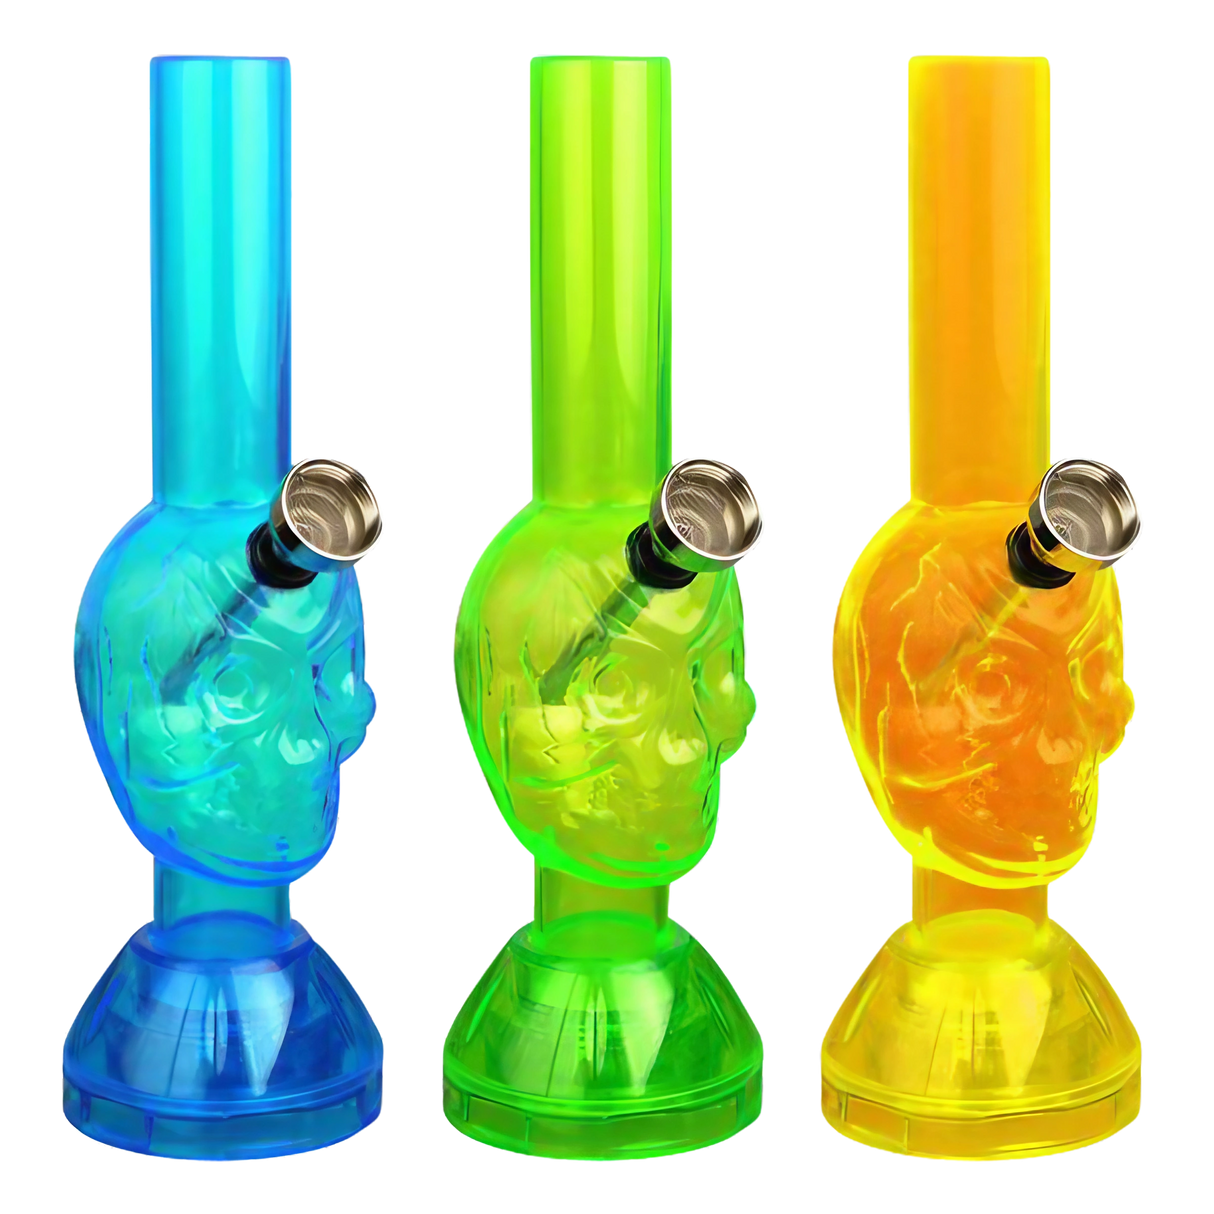 Assorted Mini Acrylic Skull Water Pipes with Built-in Grinders, Slit-Diffuser Percolator, 7" Height